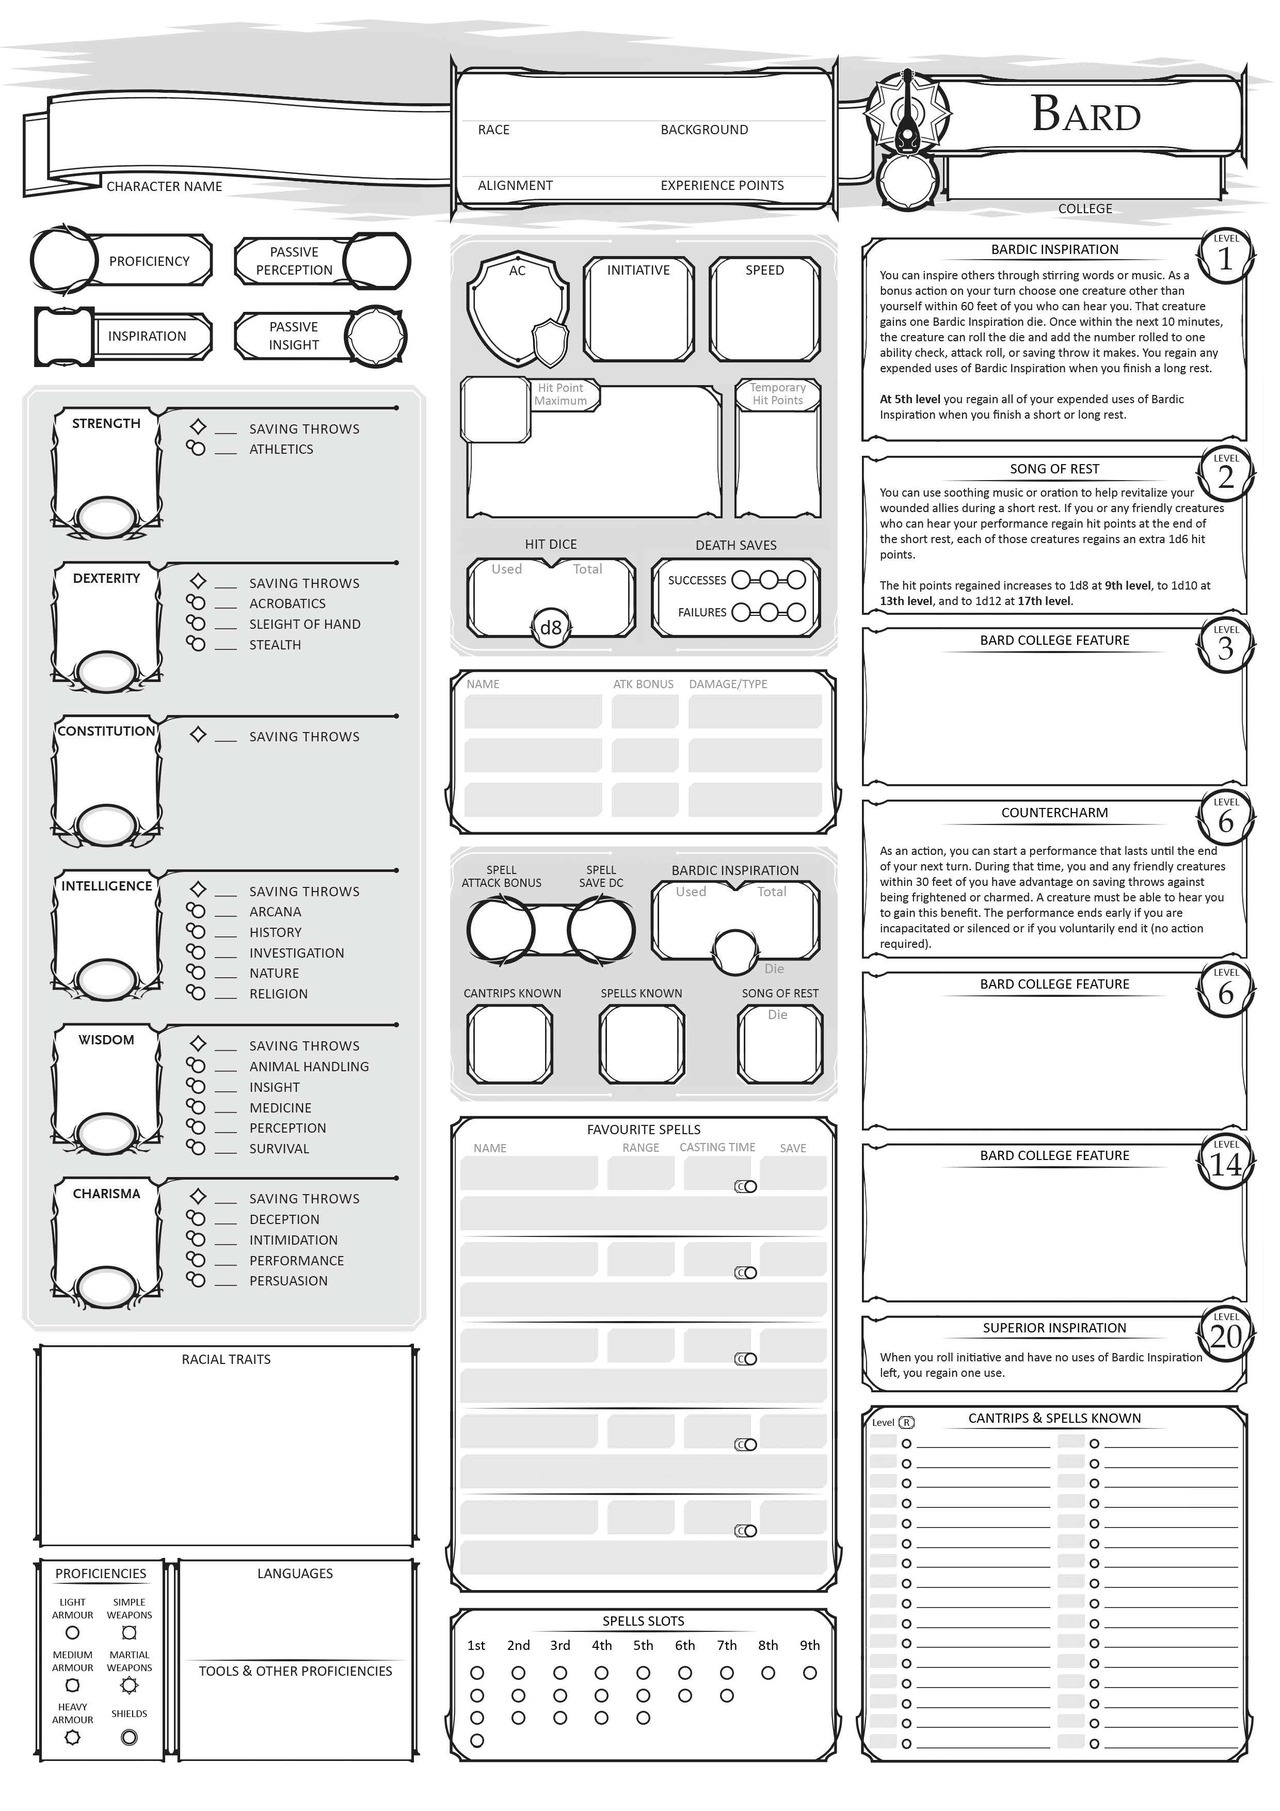 5e character builder excel